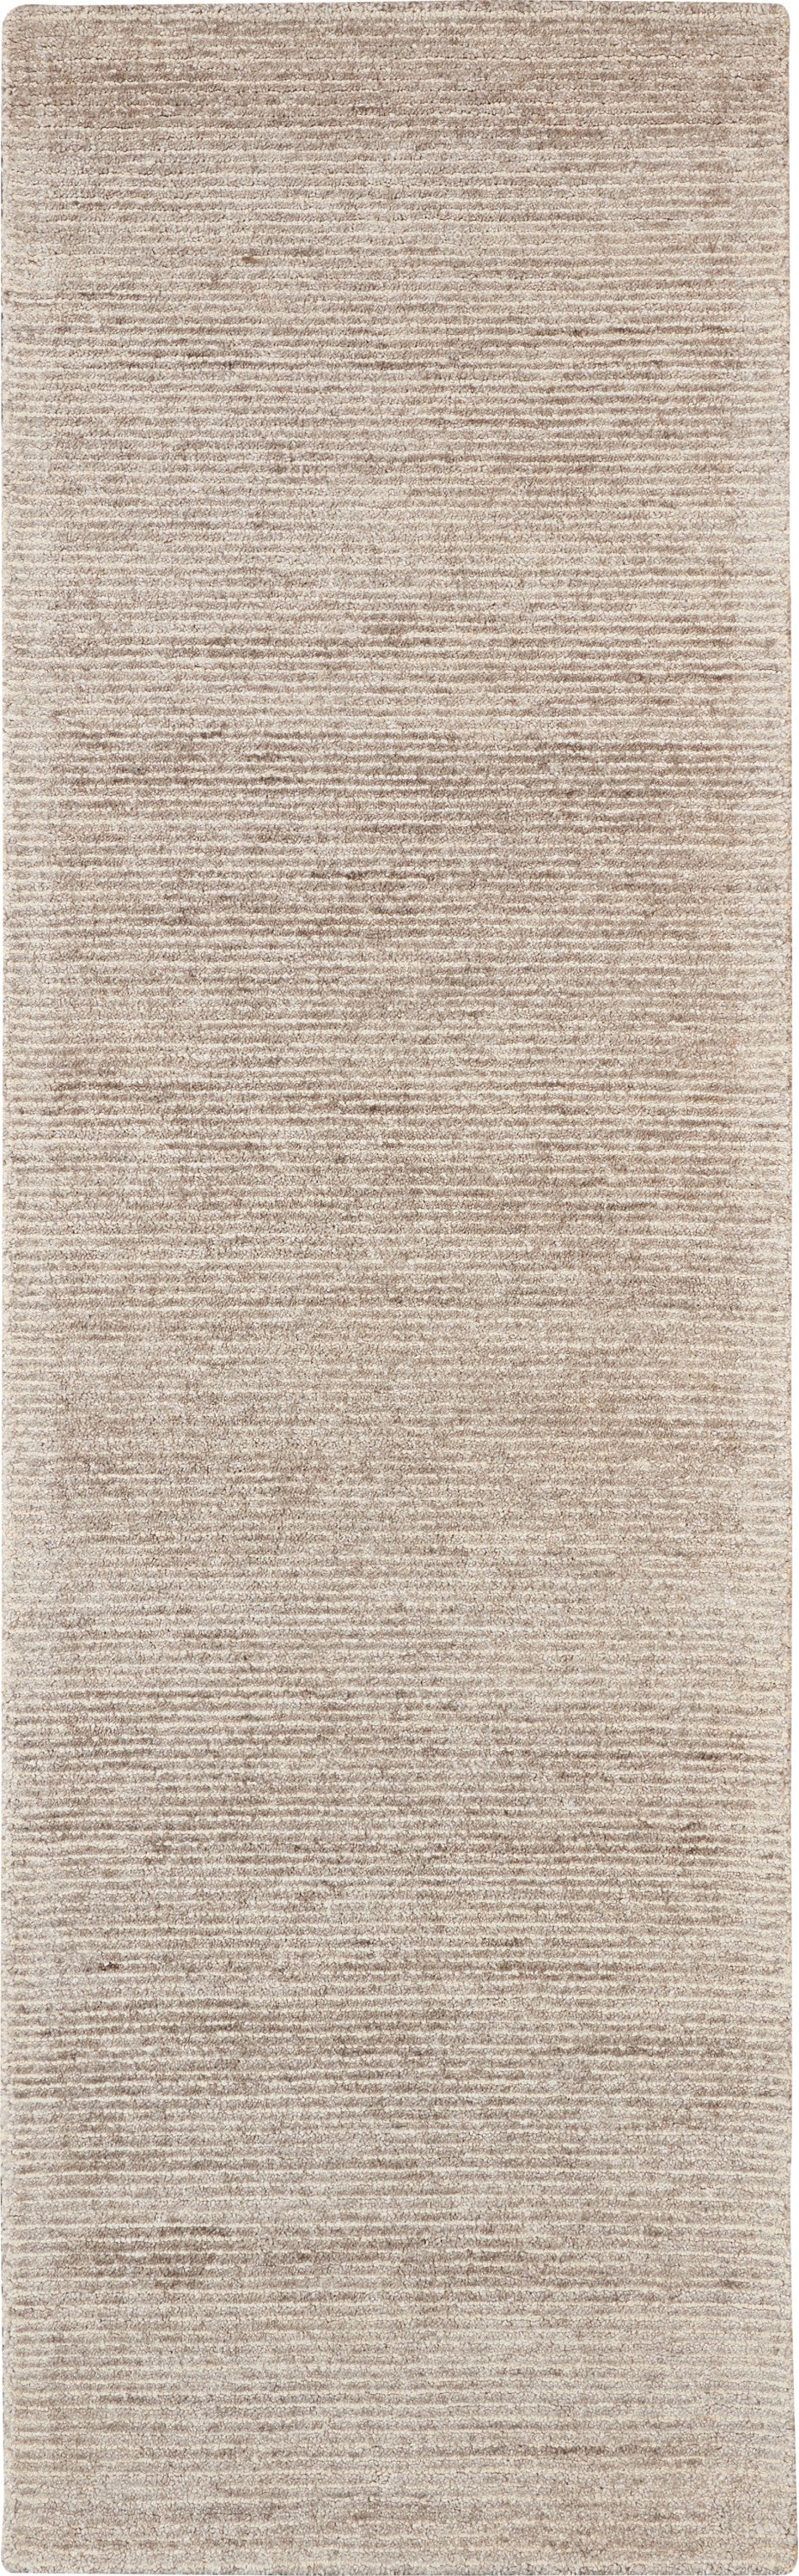 Nourison Home Weston WES01 Oatmeal Contemporary Tufted Rug